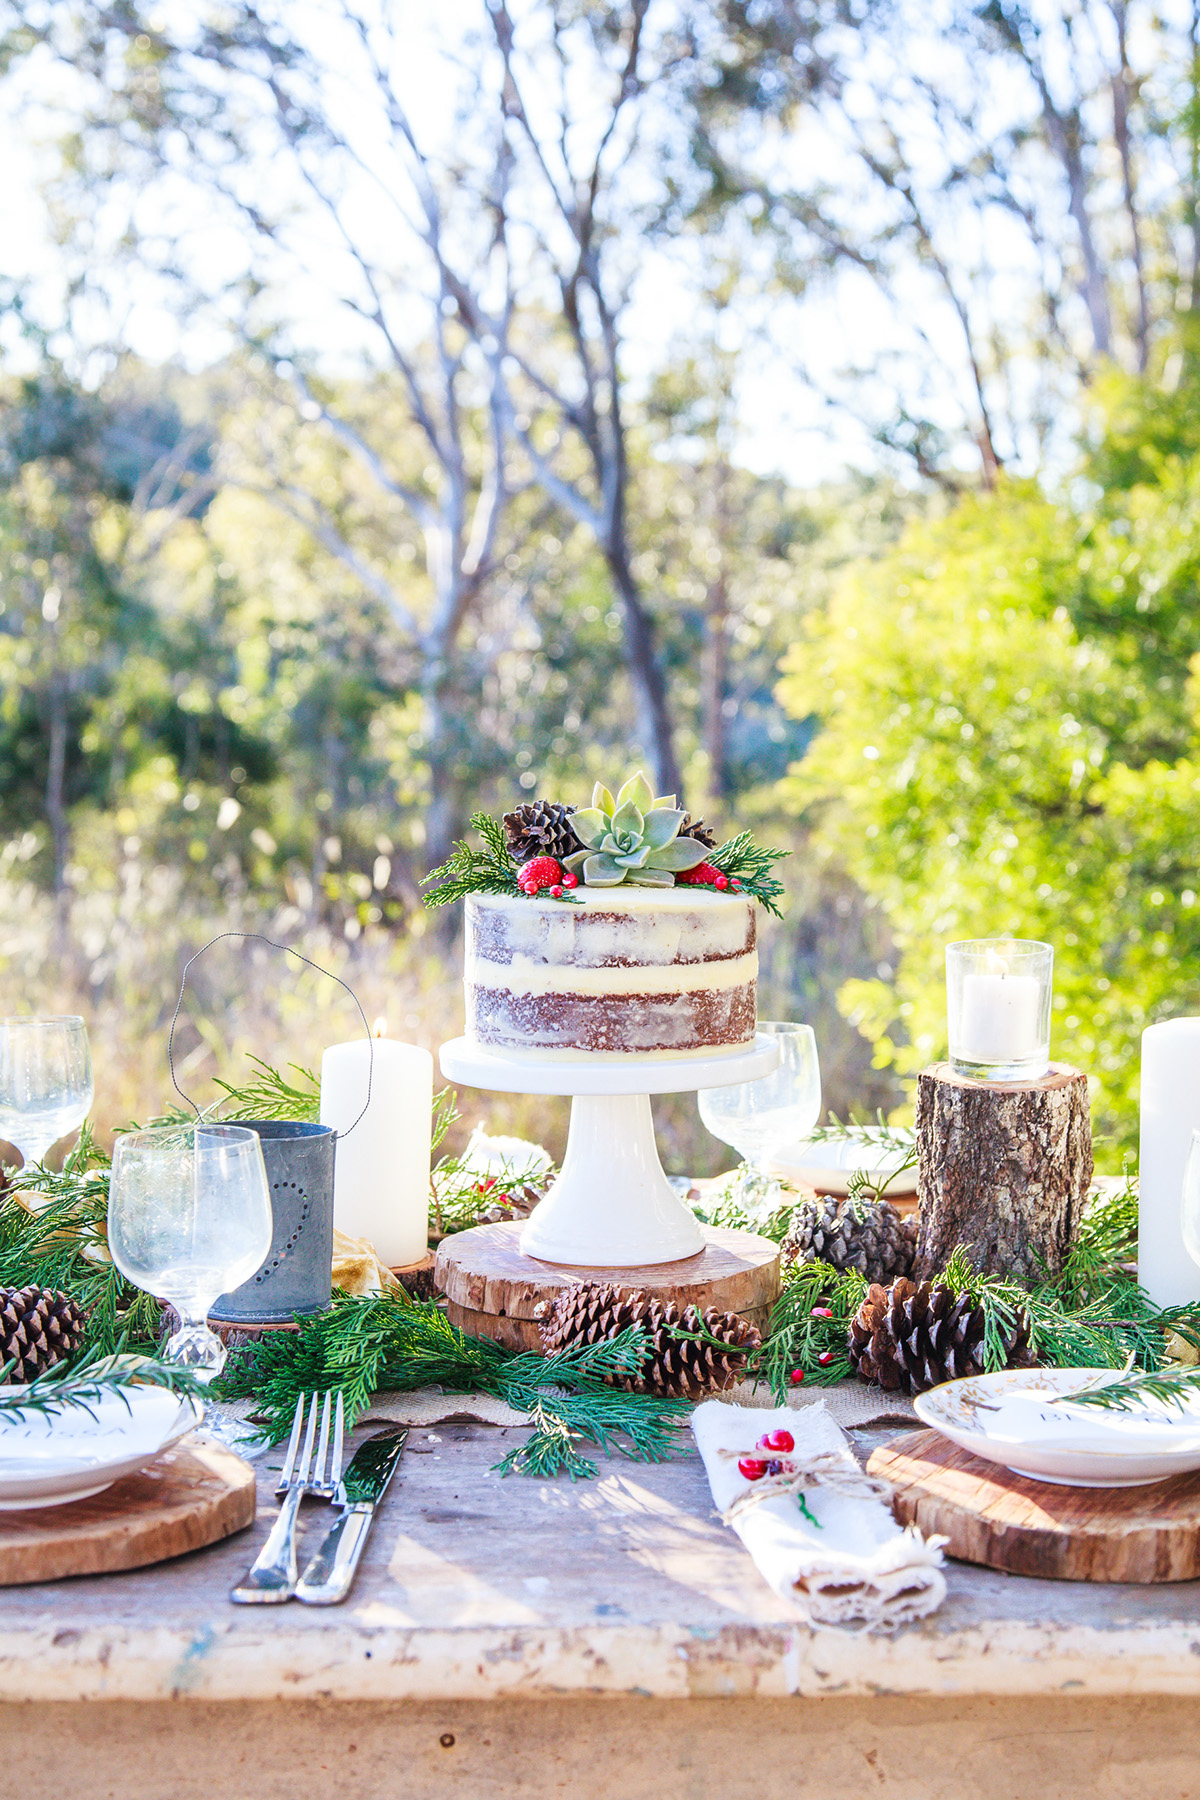 rustic Christmas tablescape Outdoor Paddock wedding Naked Cake natural setting